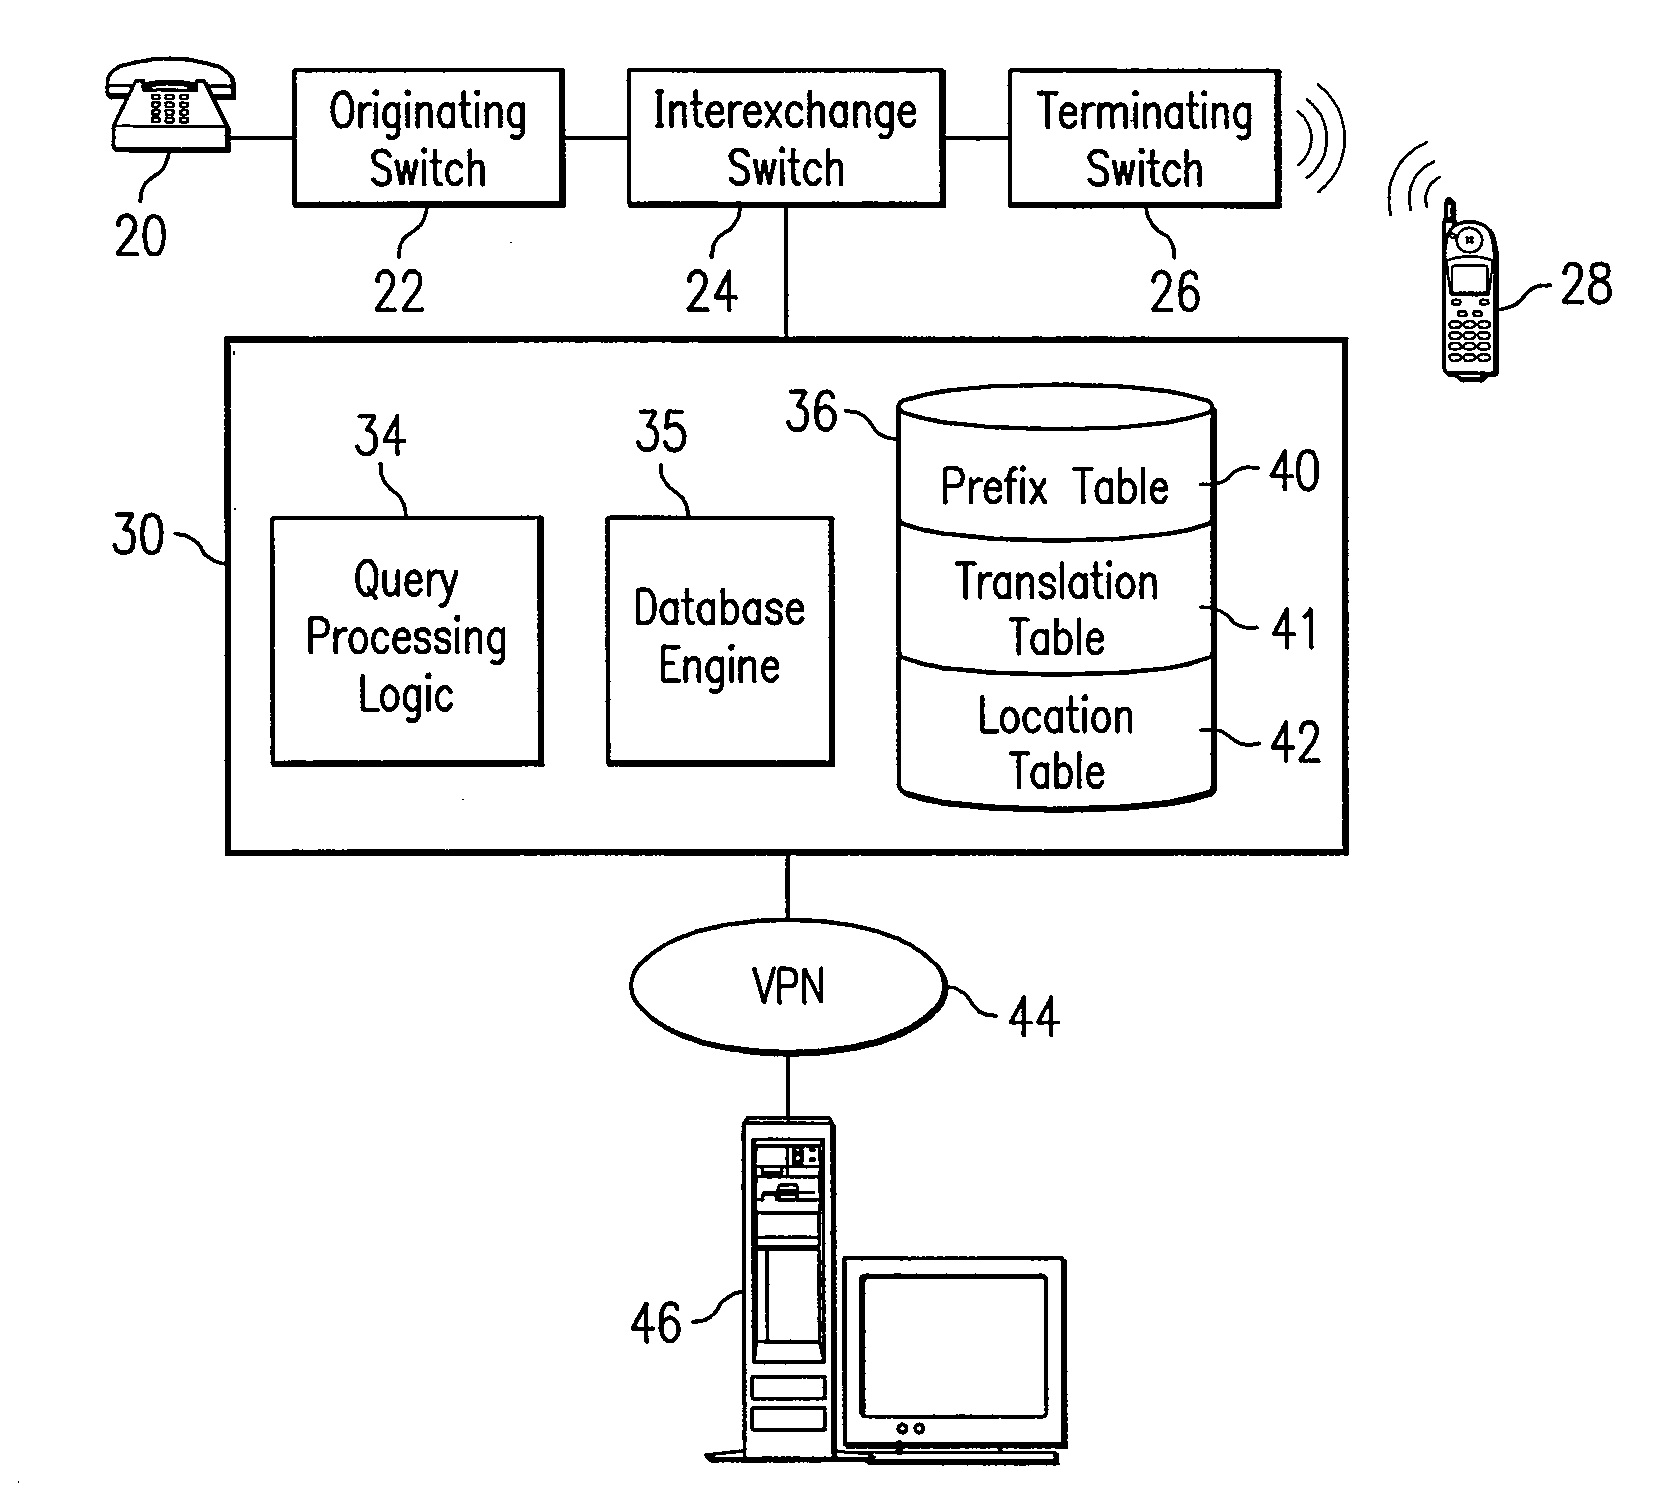 System and method for determining characteristics for international calls